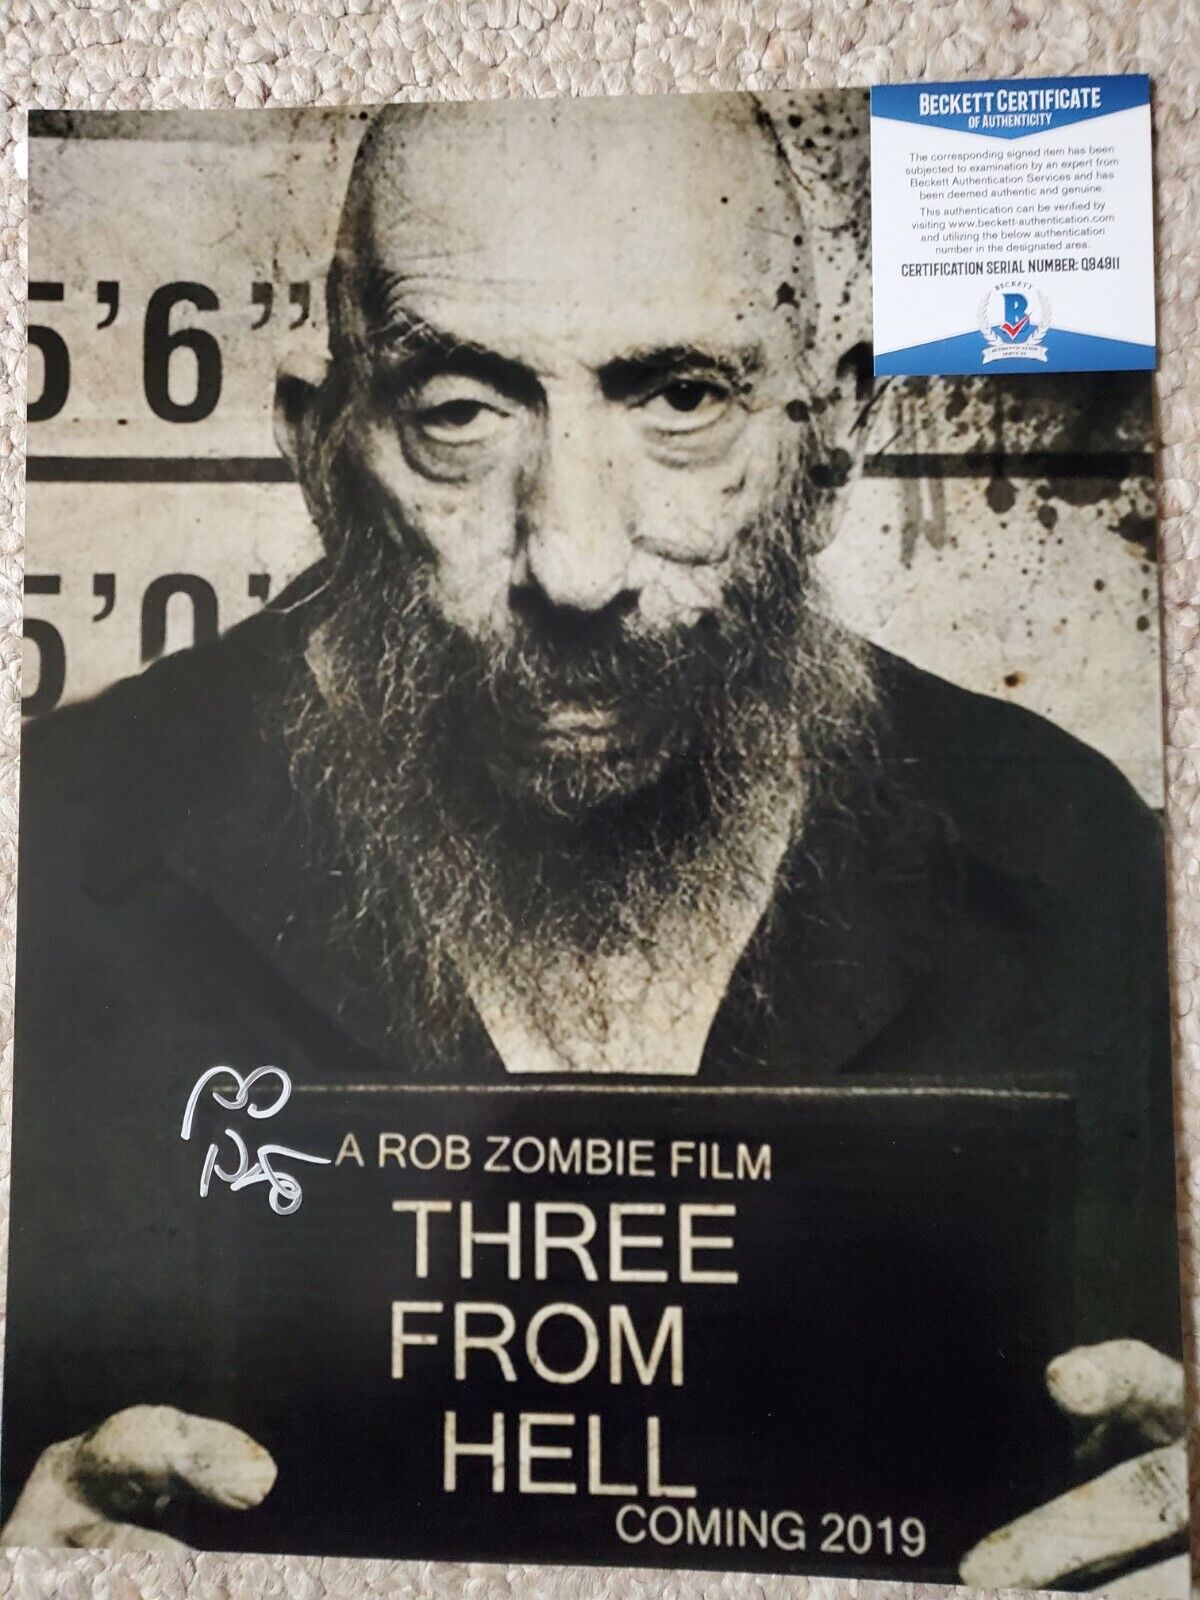 SID HAIG SIGNED 3 FROM HELL 11X14 Photo Poster painting ROB ZOMBIE HORROR ULTRA RARE!!!!